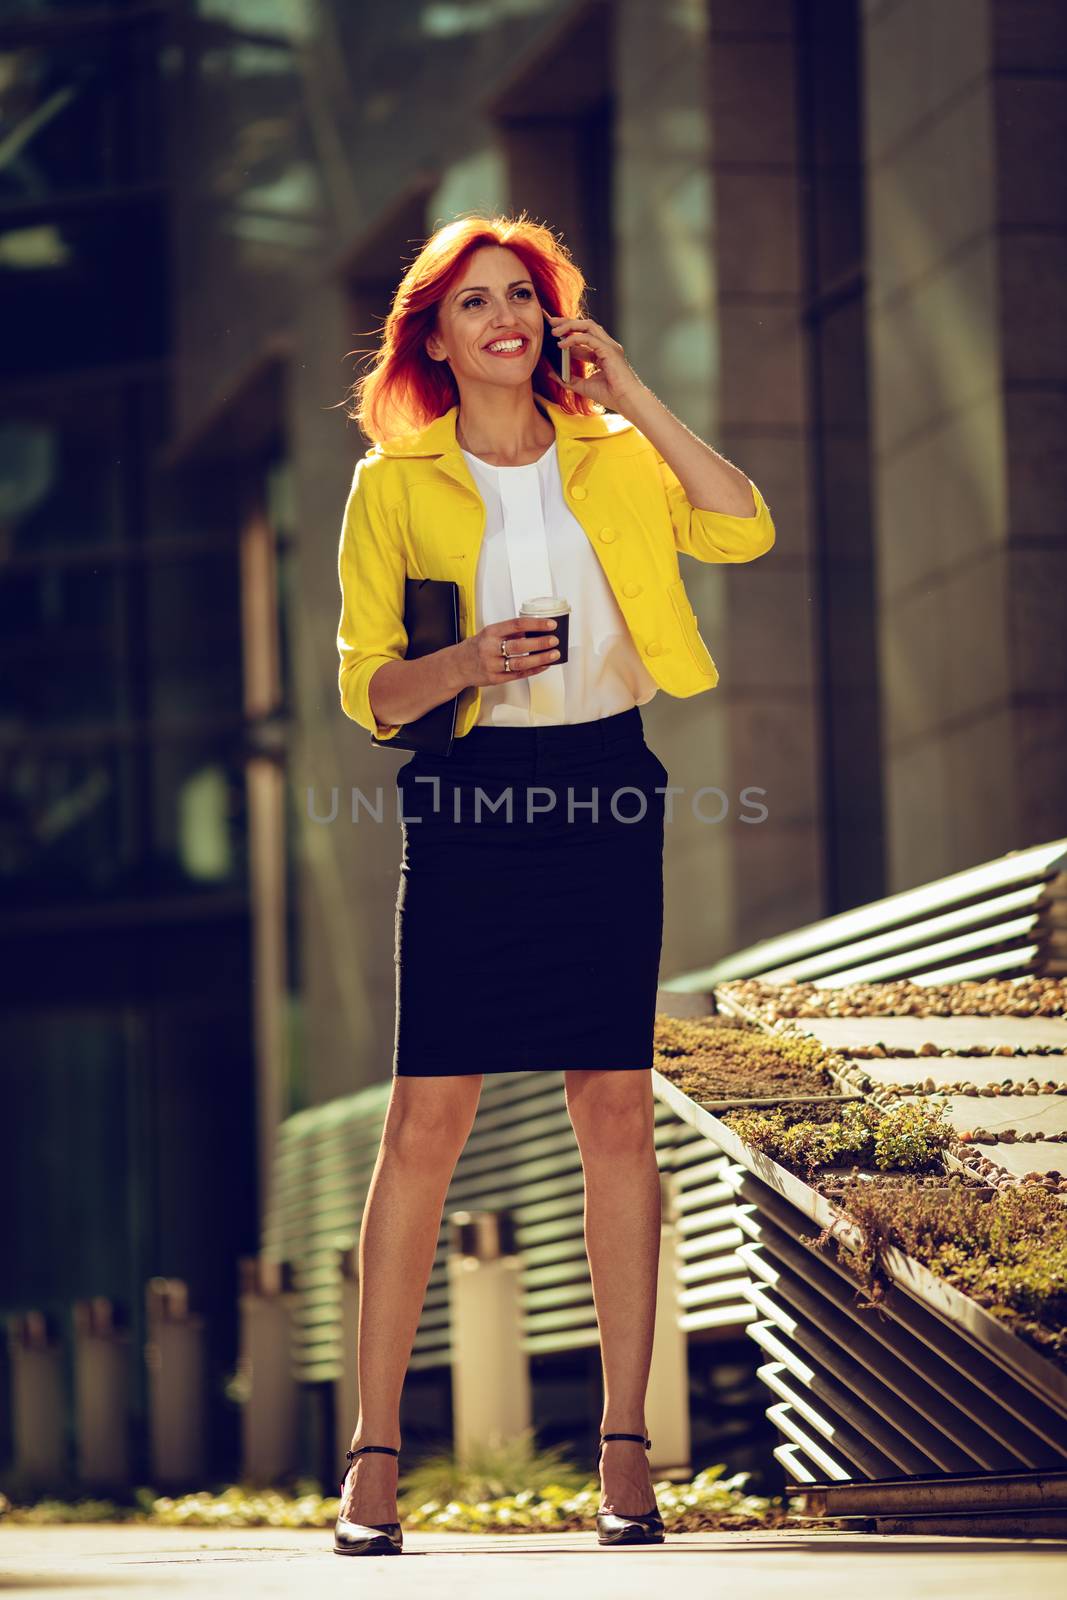 Smiling successful businesswoman using smartphone on coffee break in office district. Looking away.